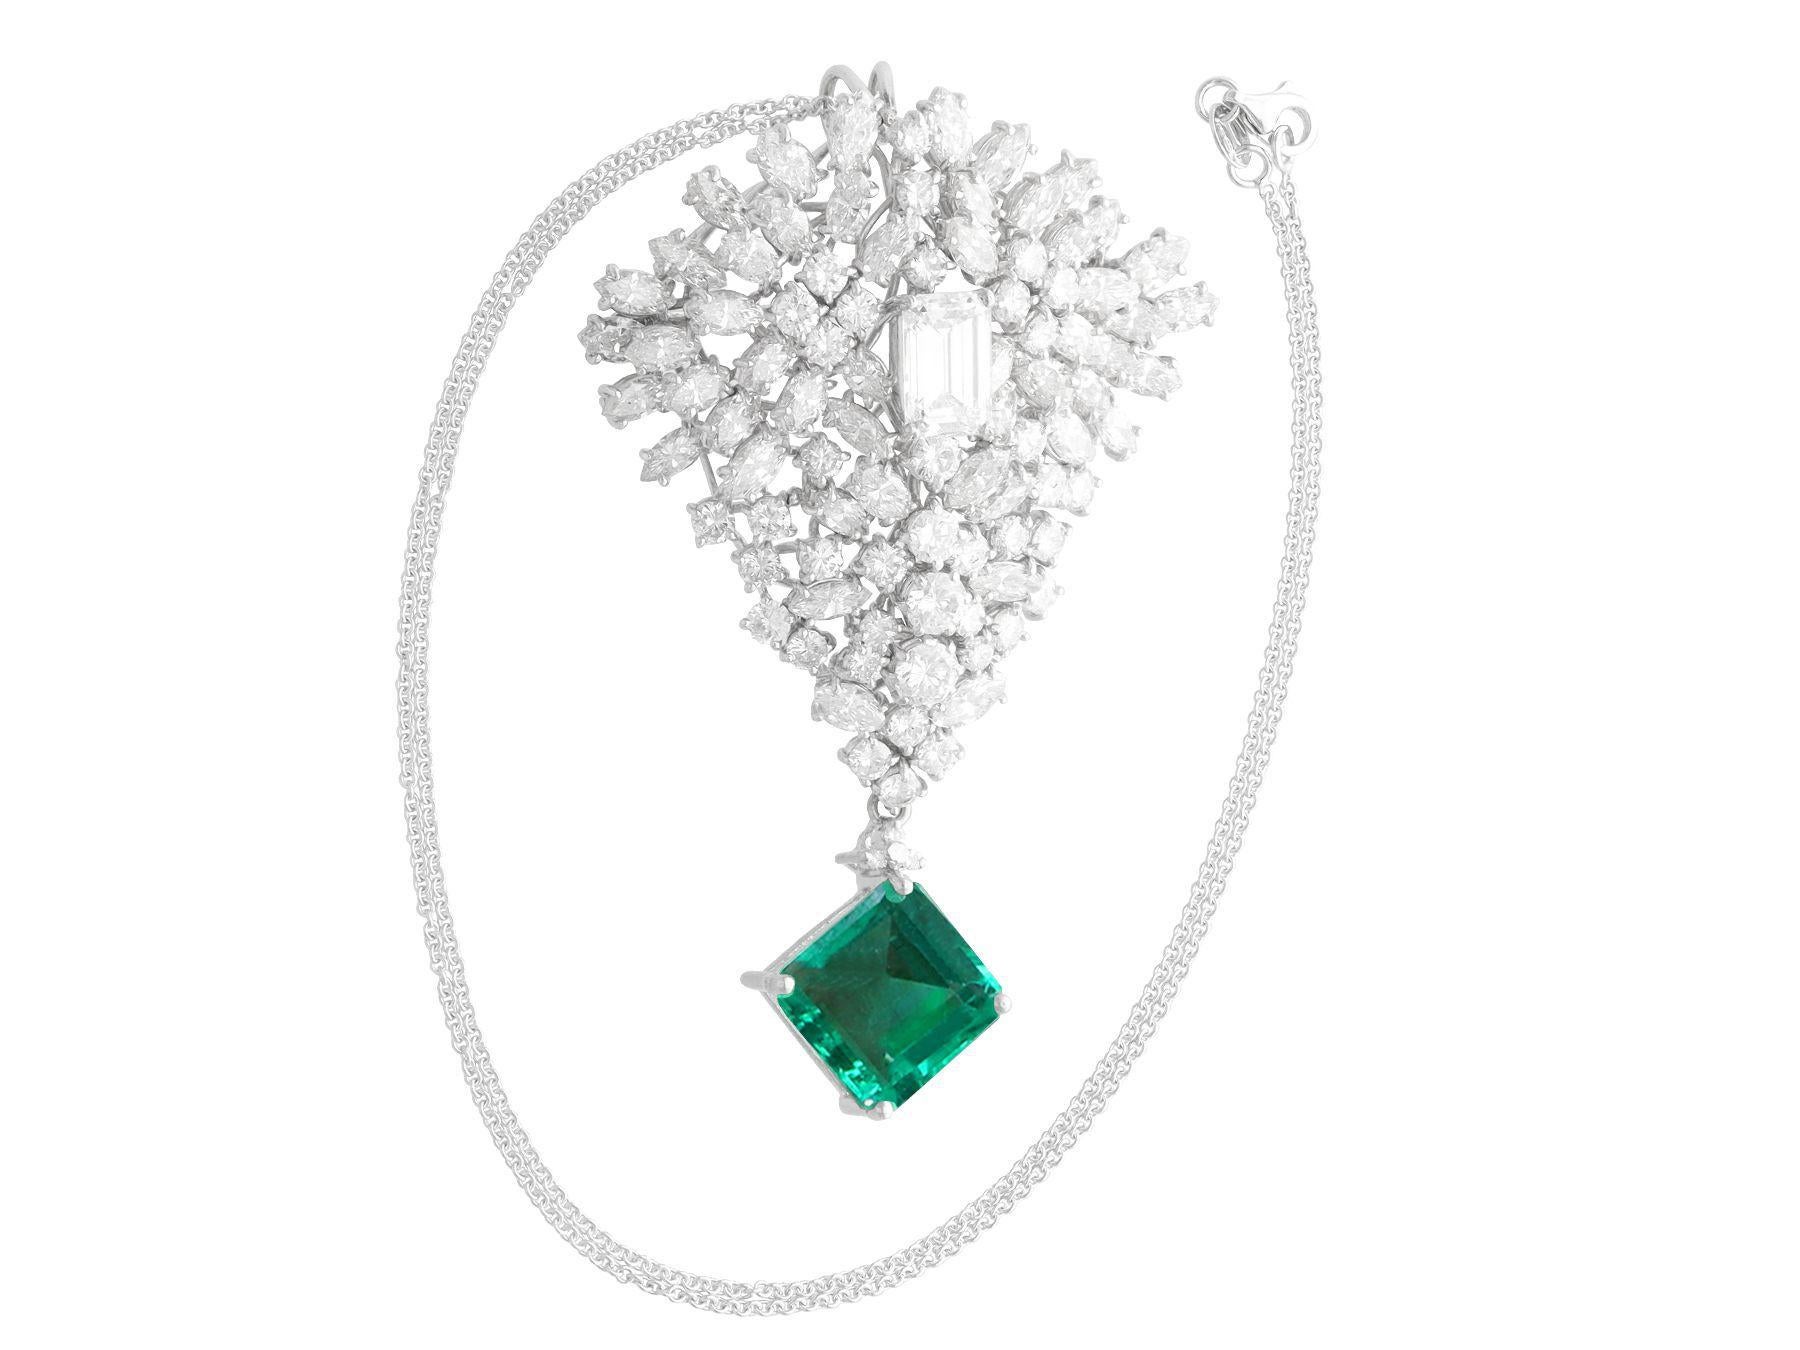 A magnificent, fine and impressive vintage 7.47 carat Zambian emerald and 14.50 carat diamond, 18 karat white gold brooch; part of our diverse emerald jewellery collections.

This magnificent vintage brooch has been crafted in 18k white gold.

The